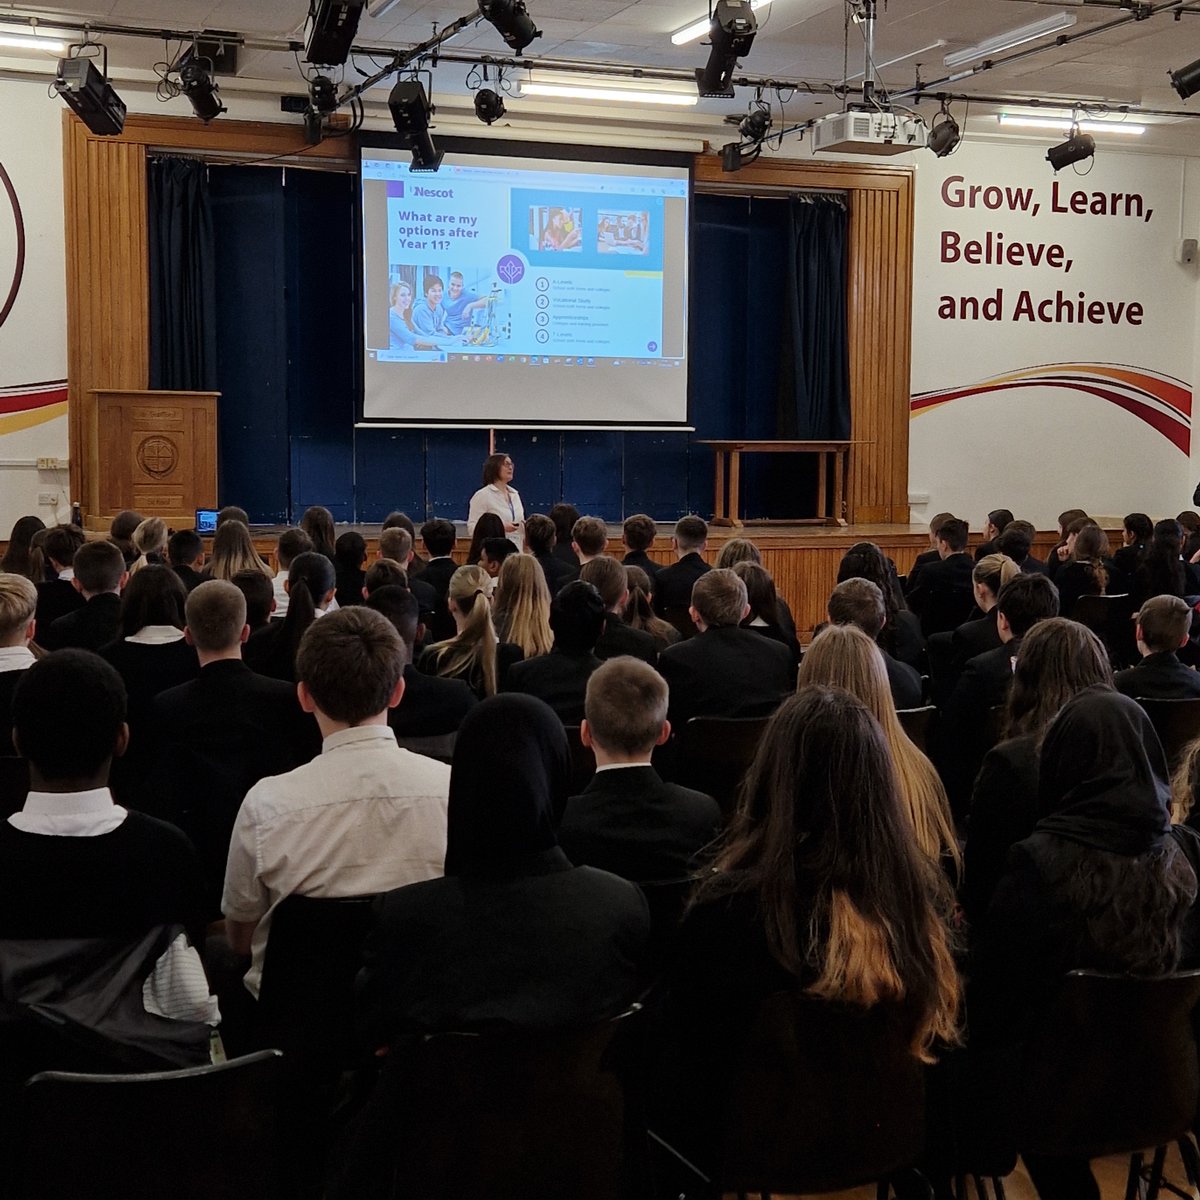 A huge thank you to Hayley Dawson from Nescot College who delivered an excellent presentation to our Year 9 cohort this morning all about their Post-16 training courses and facilities 👏